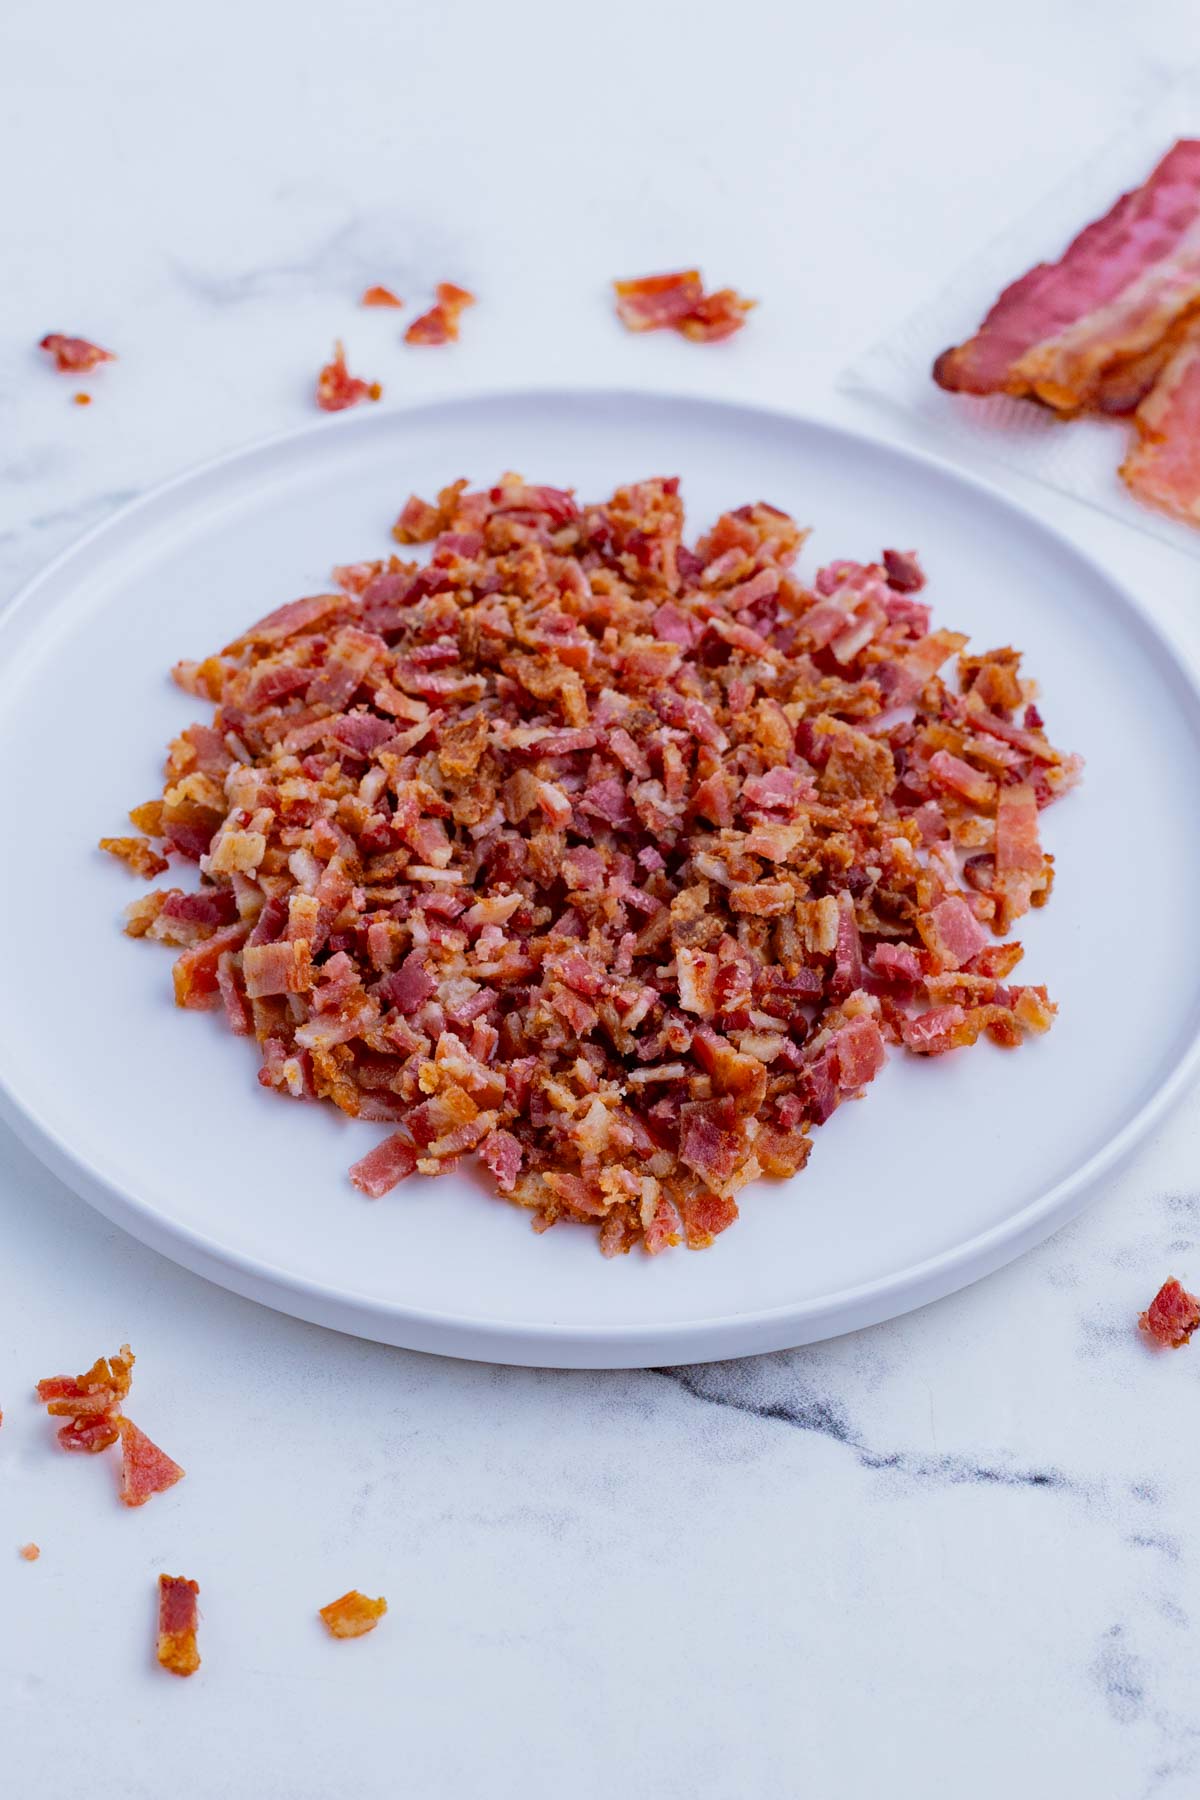 A plate full of chopped bacon pieces are ready to use.